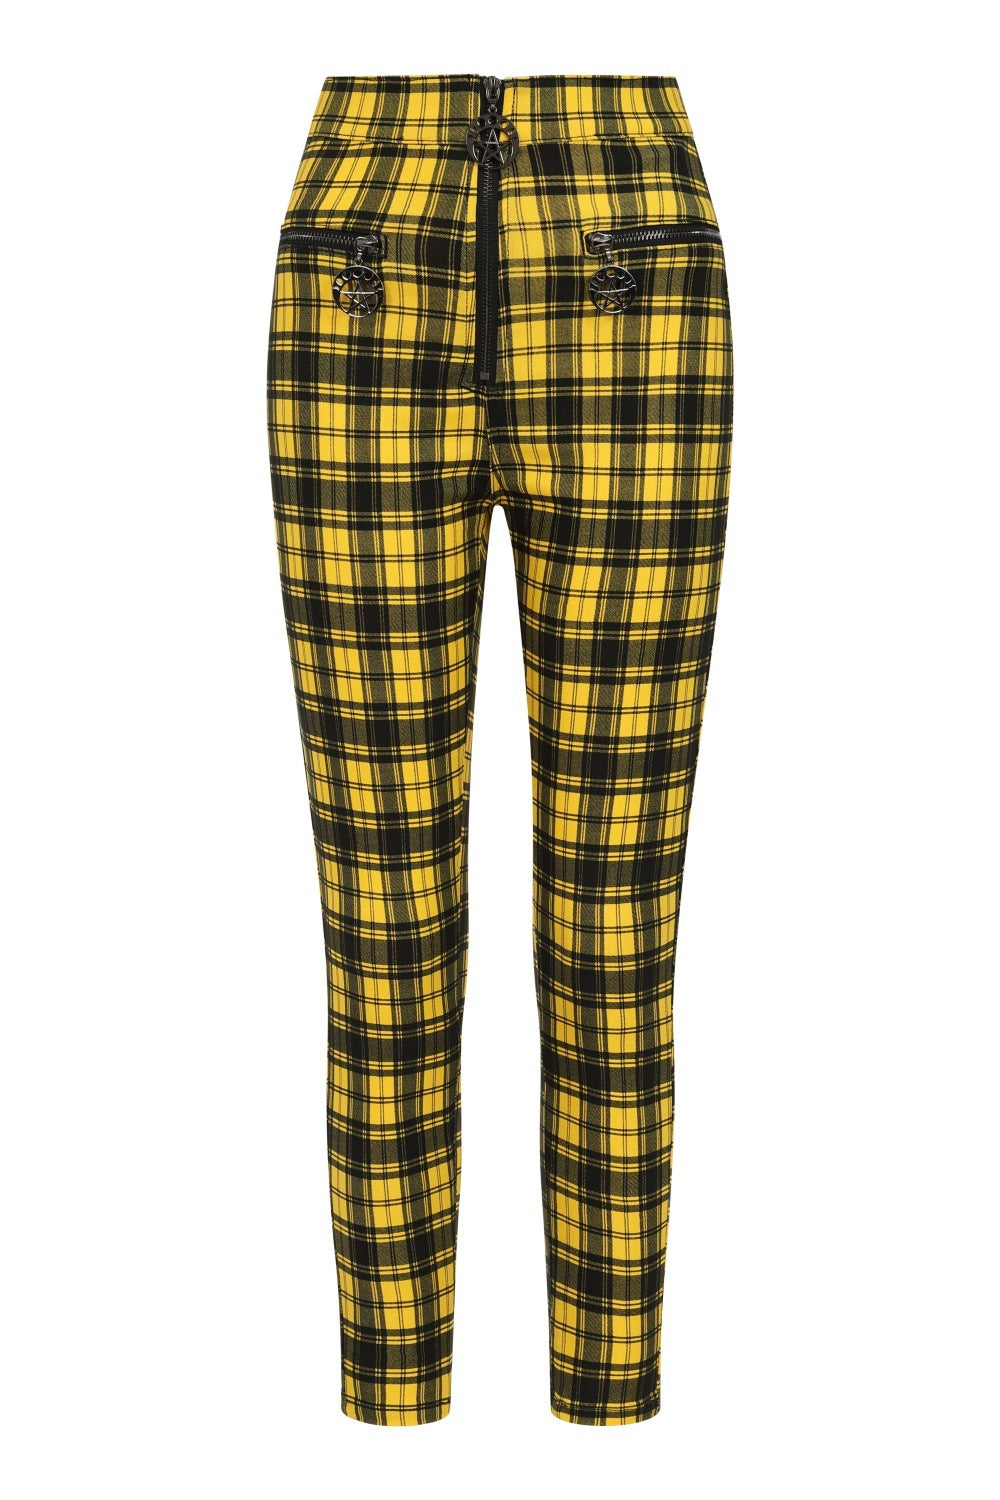 Banned Alternative Damien Stretch Check Trousers